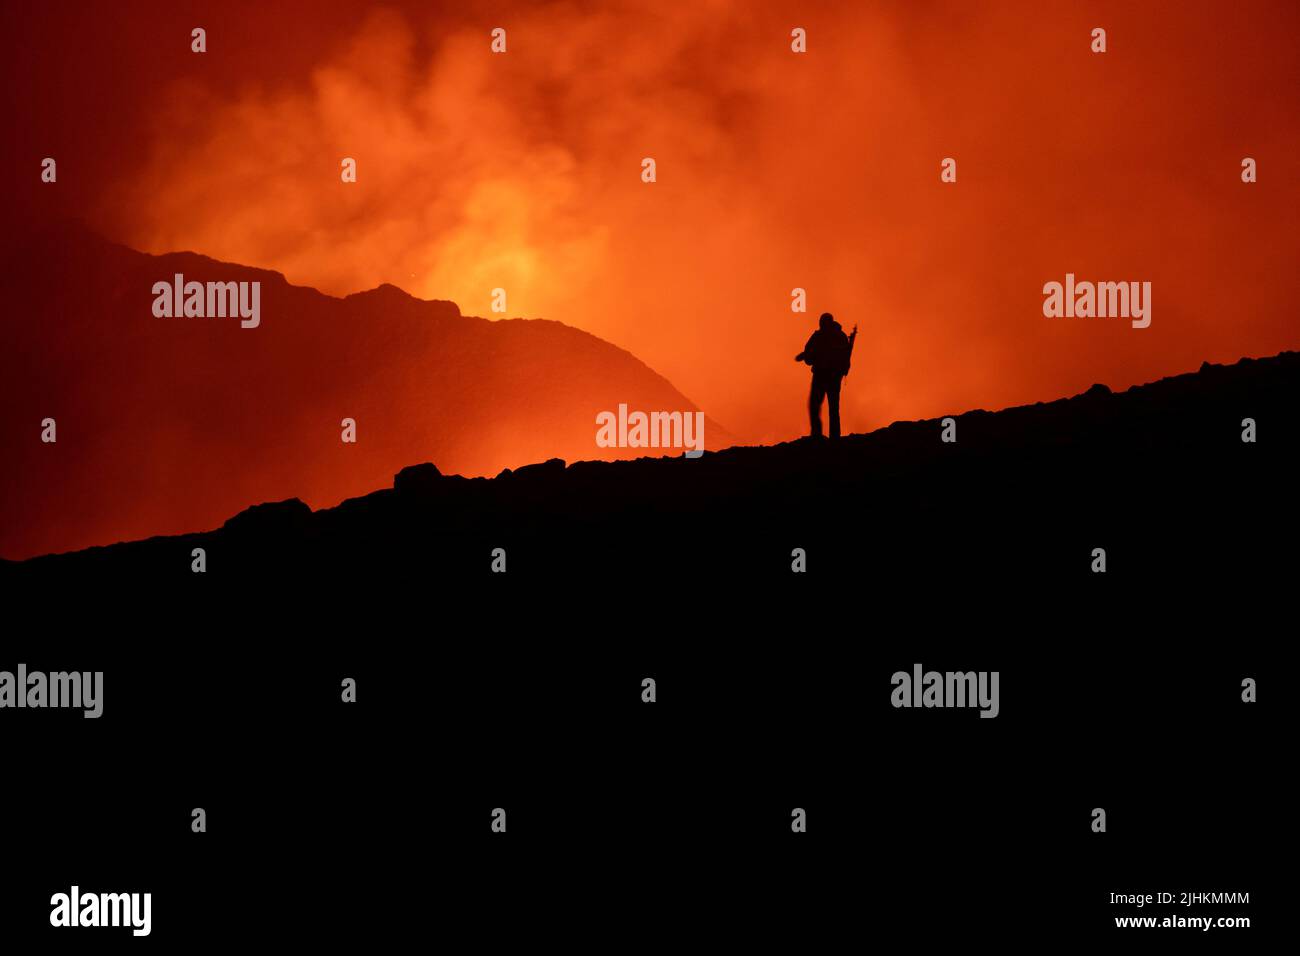 A silhouette of a tourist looking at and photographing the eruption in Iceland in 2021, the person is not identifyable and is set against the orange s Stock Photo